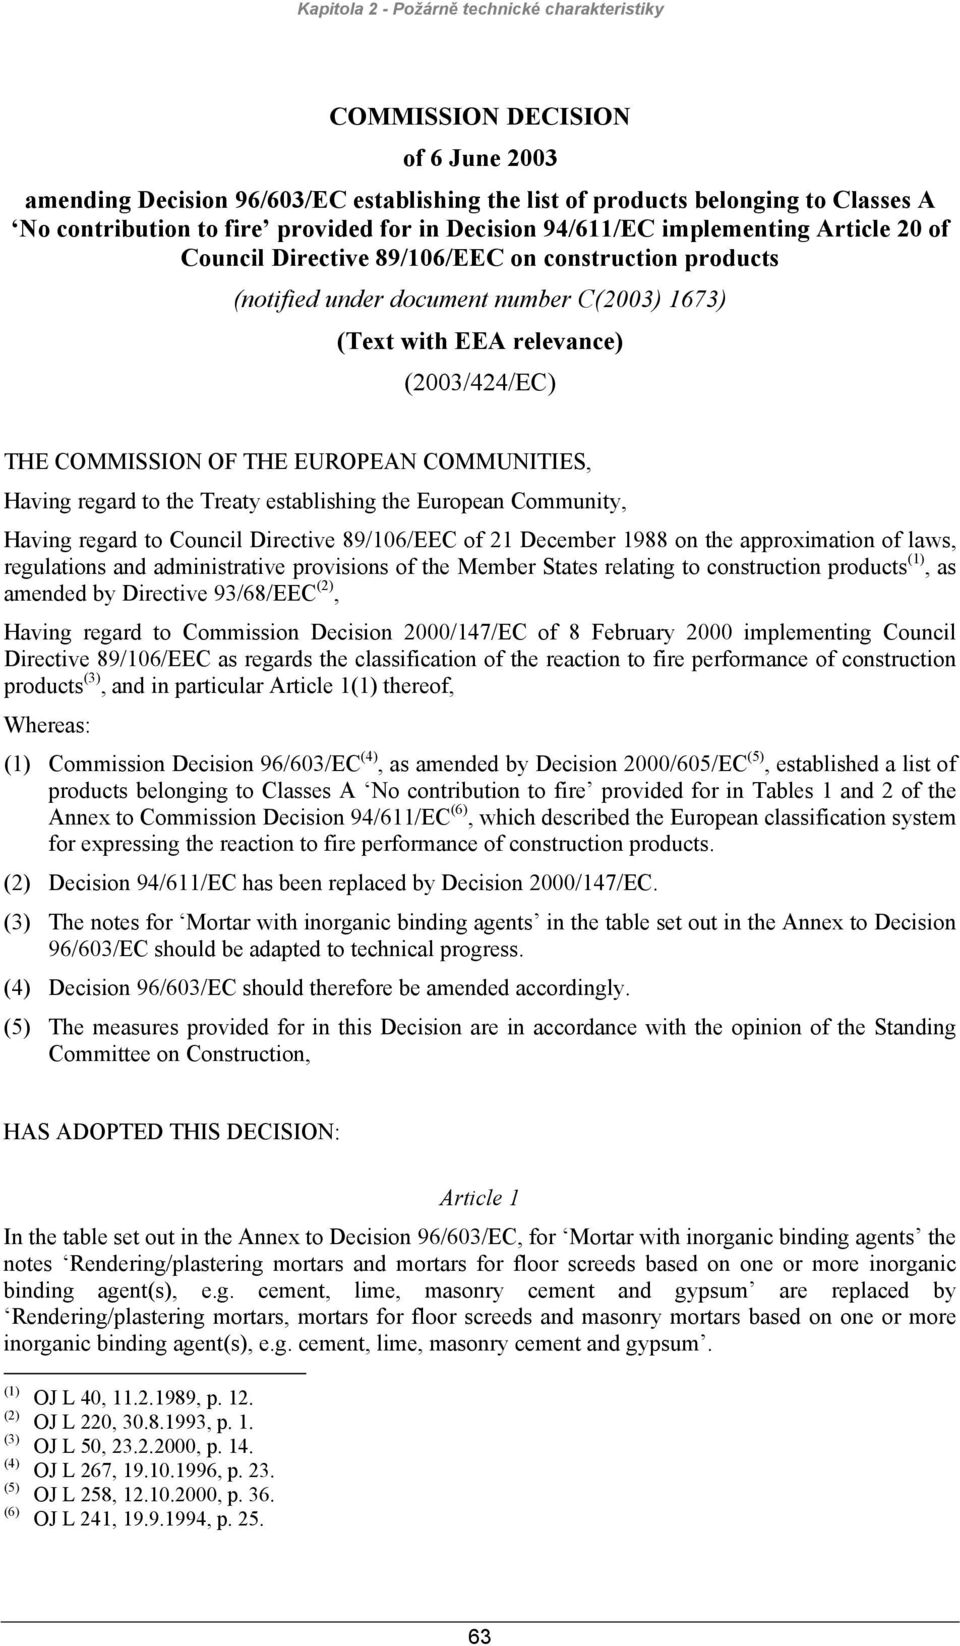 COMMISSION OF THE EUROPEAN COMMUNITIES, Having regard to the Treaty establishing the European Community, Having regard to Council Directive 89/106/EEC of 21 December 1988 on the approximation of